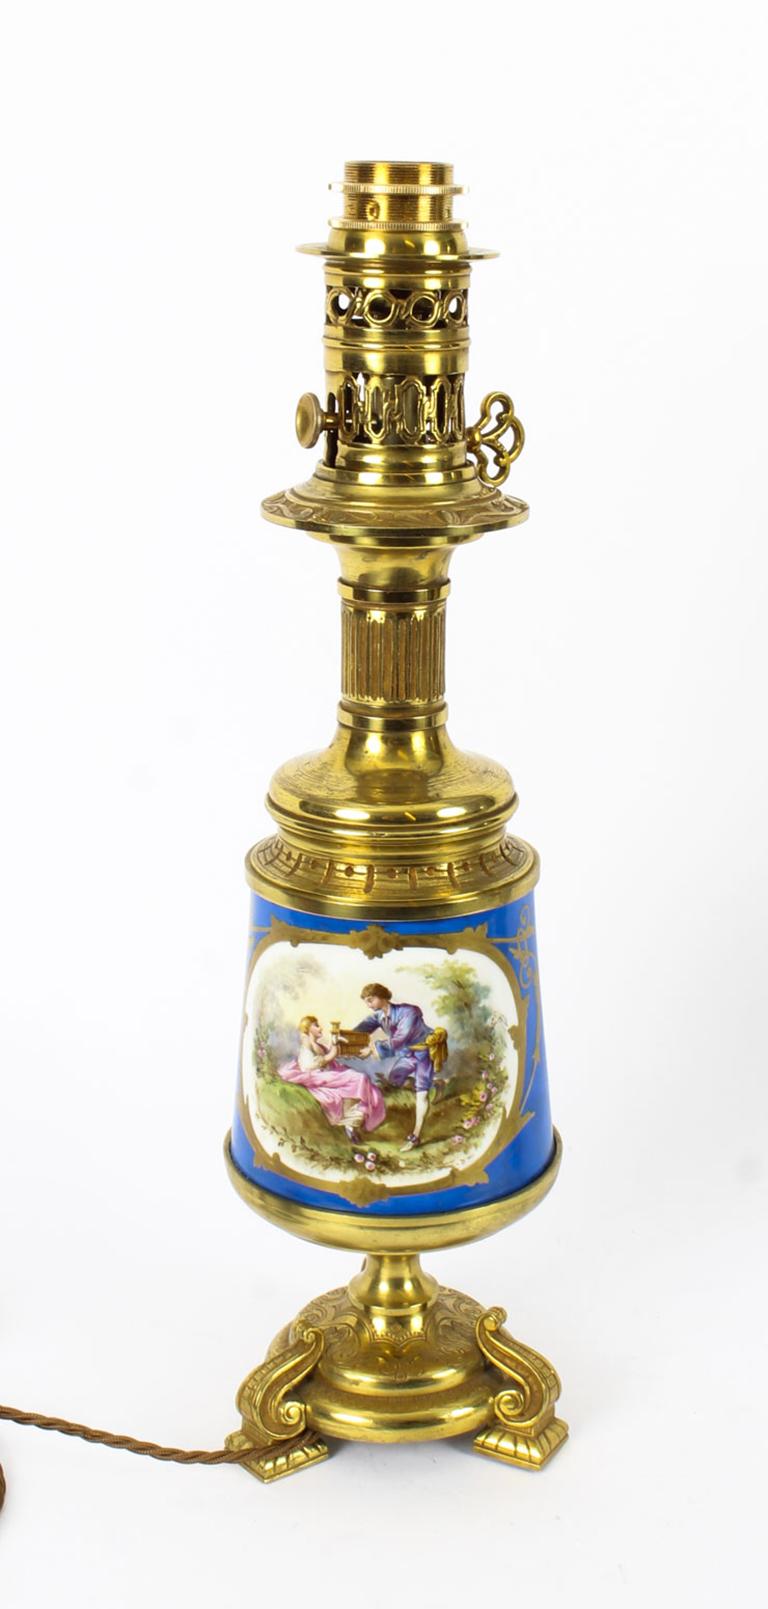 This is an exquisite large pair of French Sèvres Porcelain and ormolu mounted oil burning table lamps that have been skillfully converted to electricity retaining their original and charming oil burning mounts, circa 1870 in date.

The lamps have